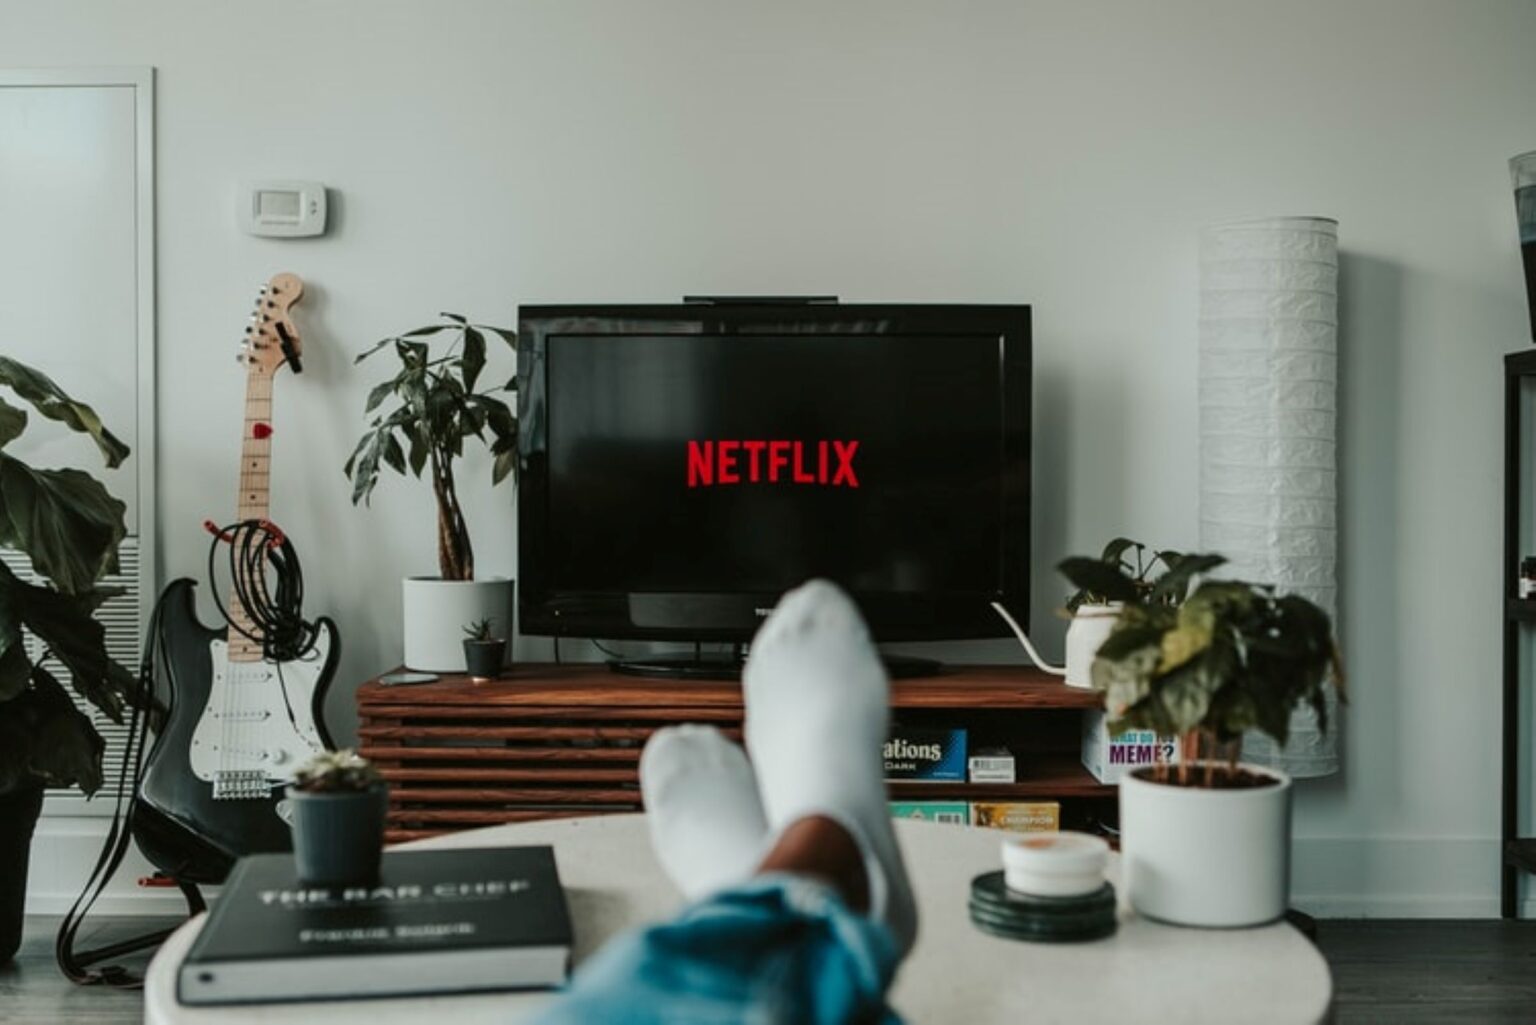 Netflix password sharing is a big deal to many people, but apparently it is to Netflix too. Before they cut the cord on your access, find out what to do.